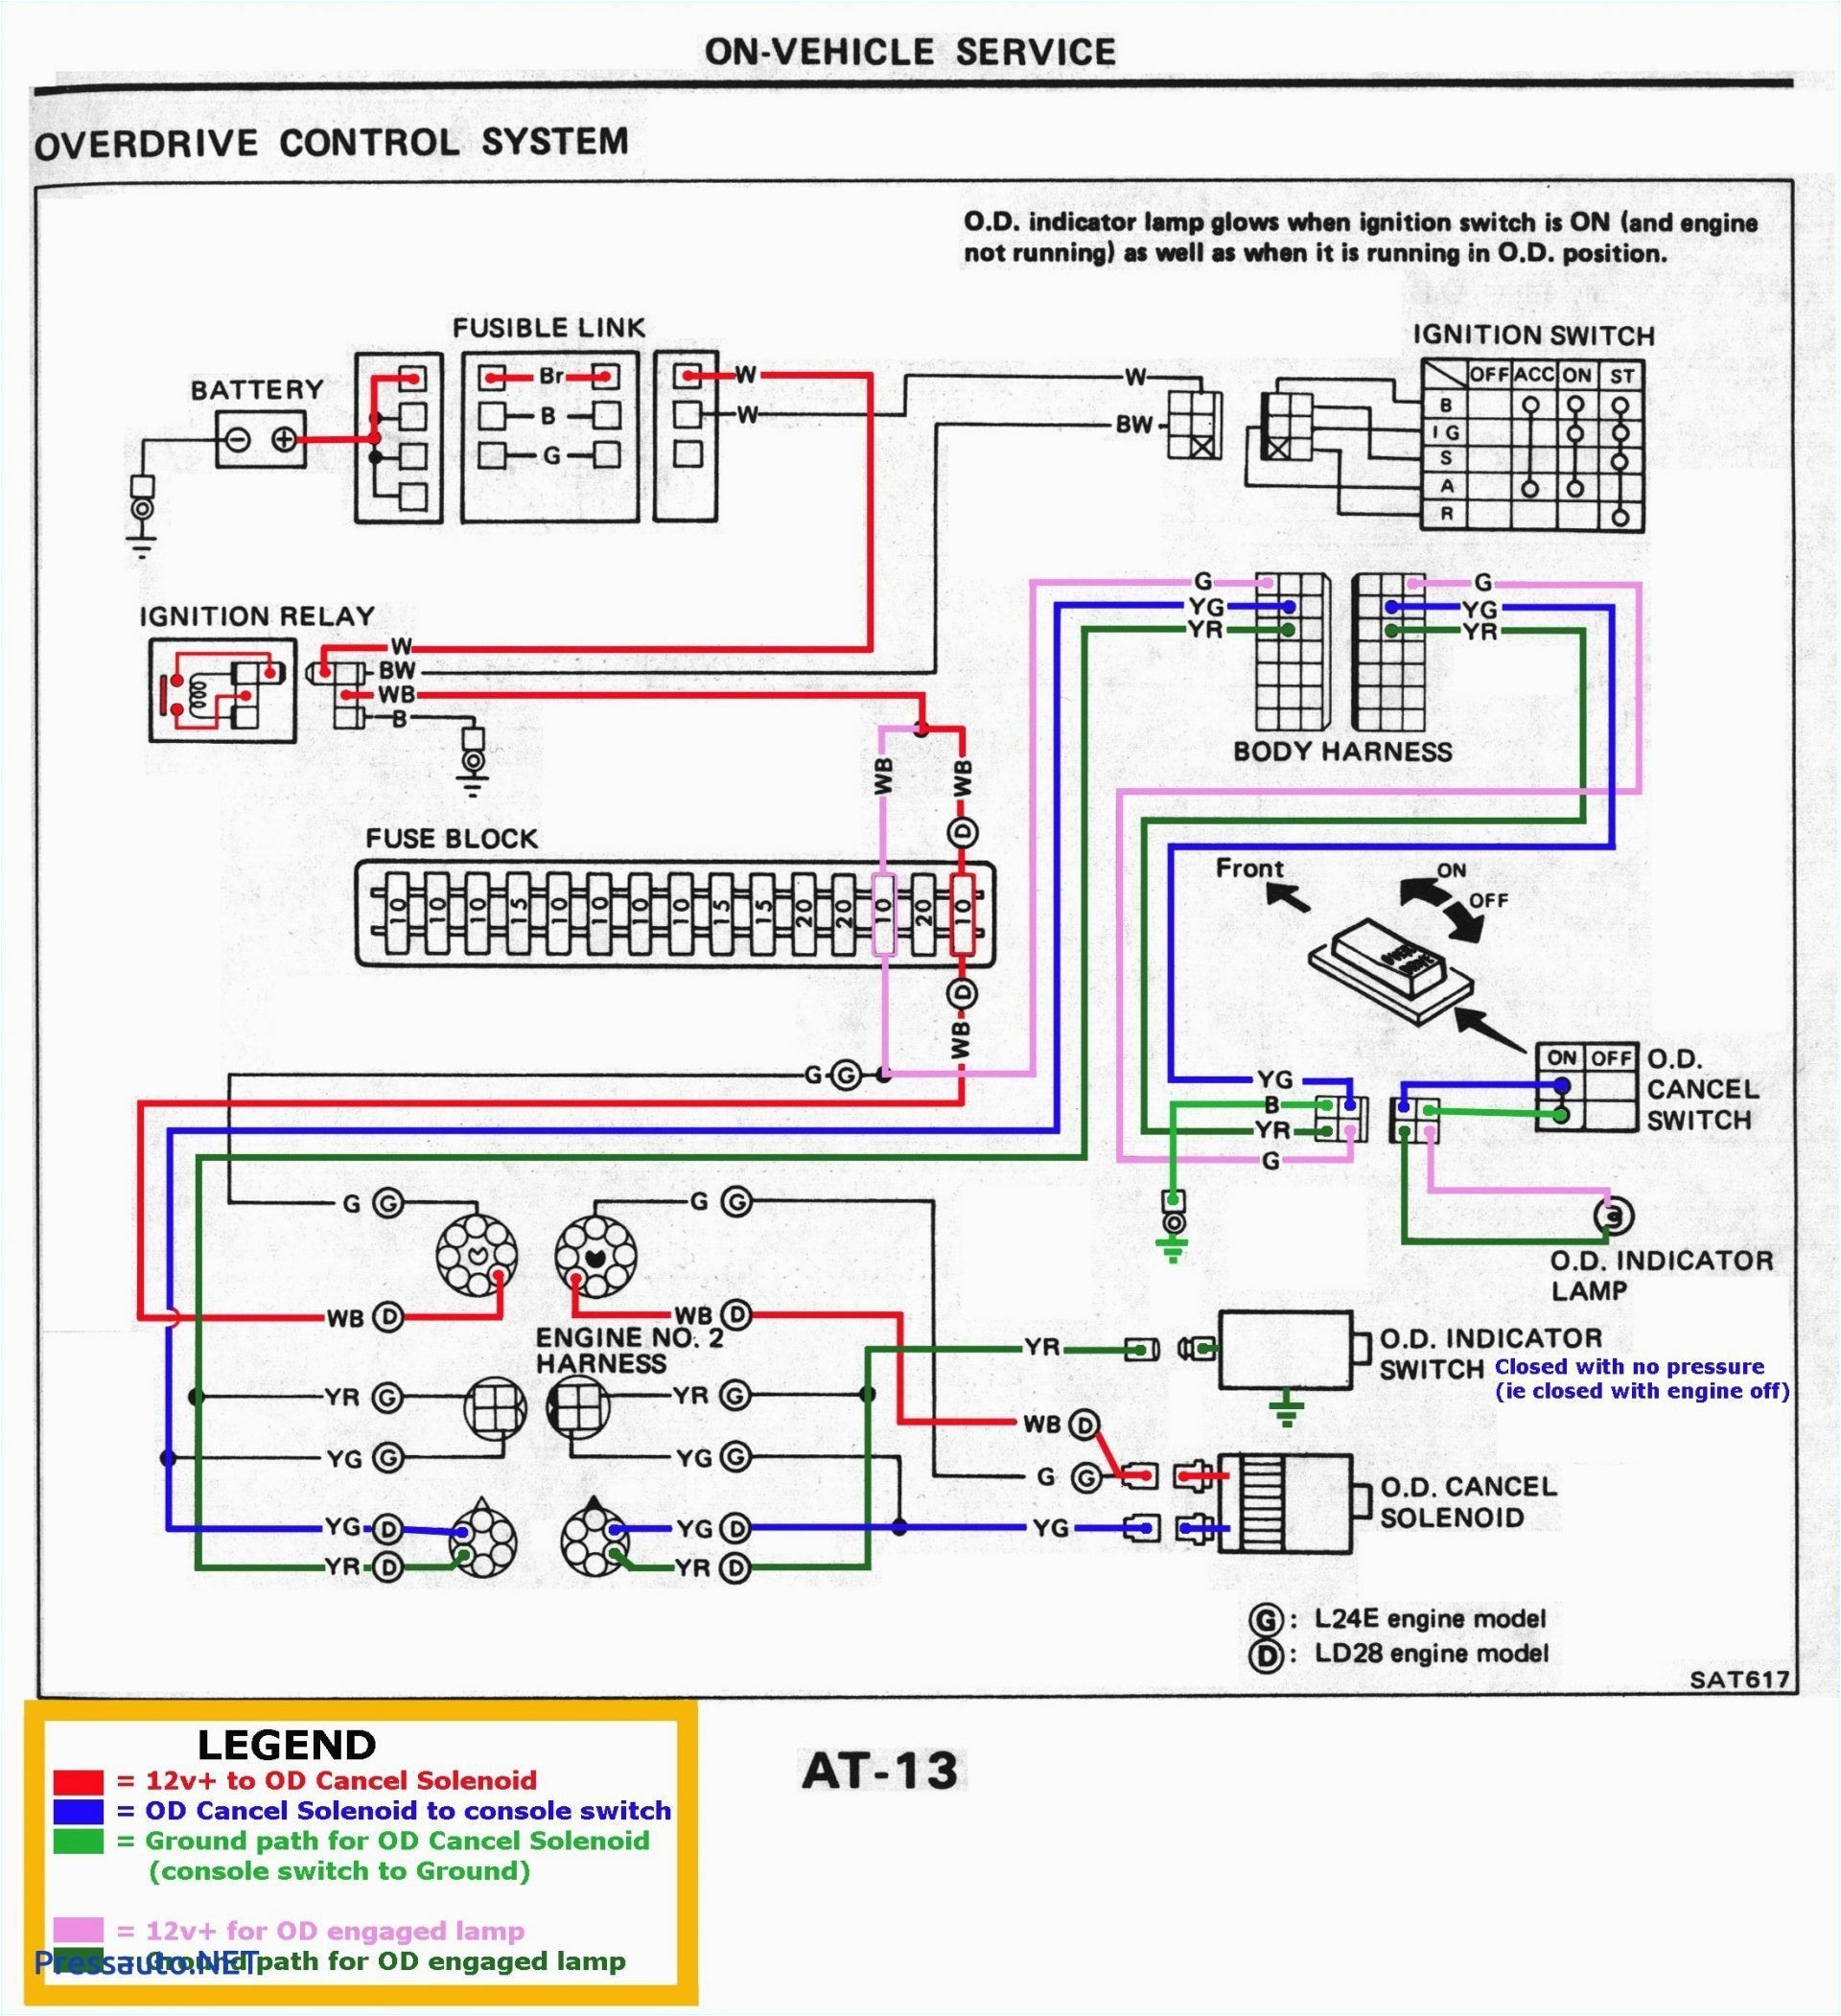 light switch location furthermore 2005 dodge ram backup light wiring how to wire speakers diagram in